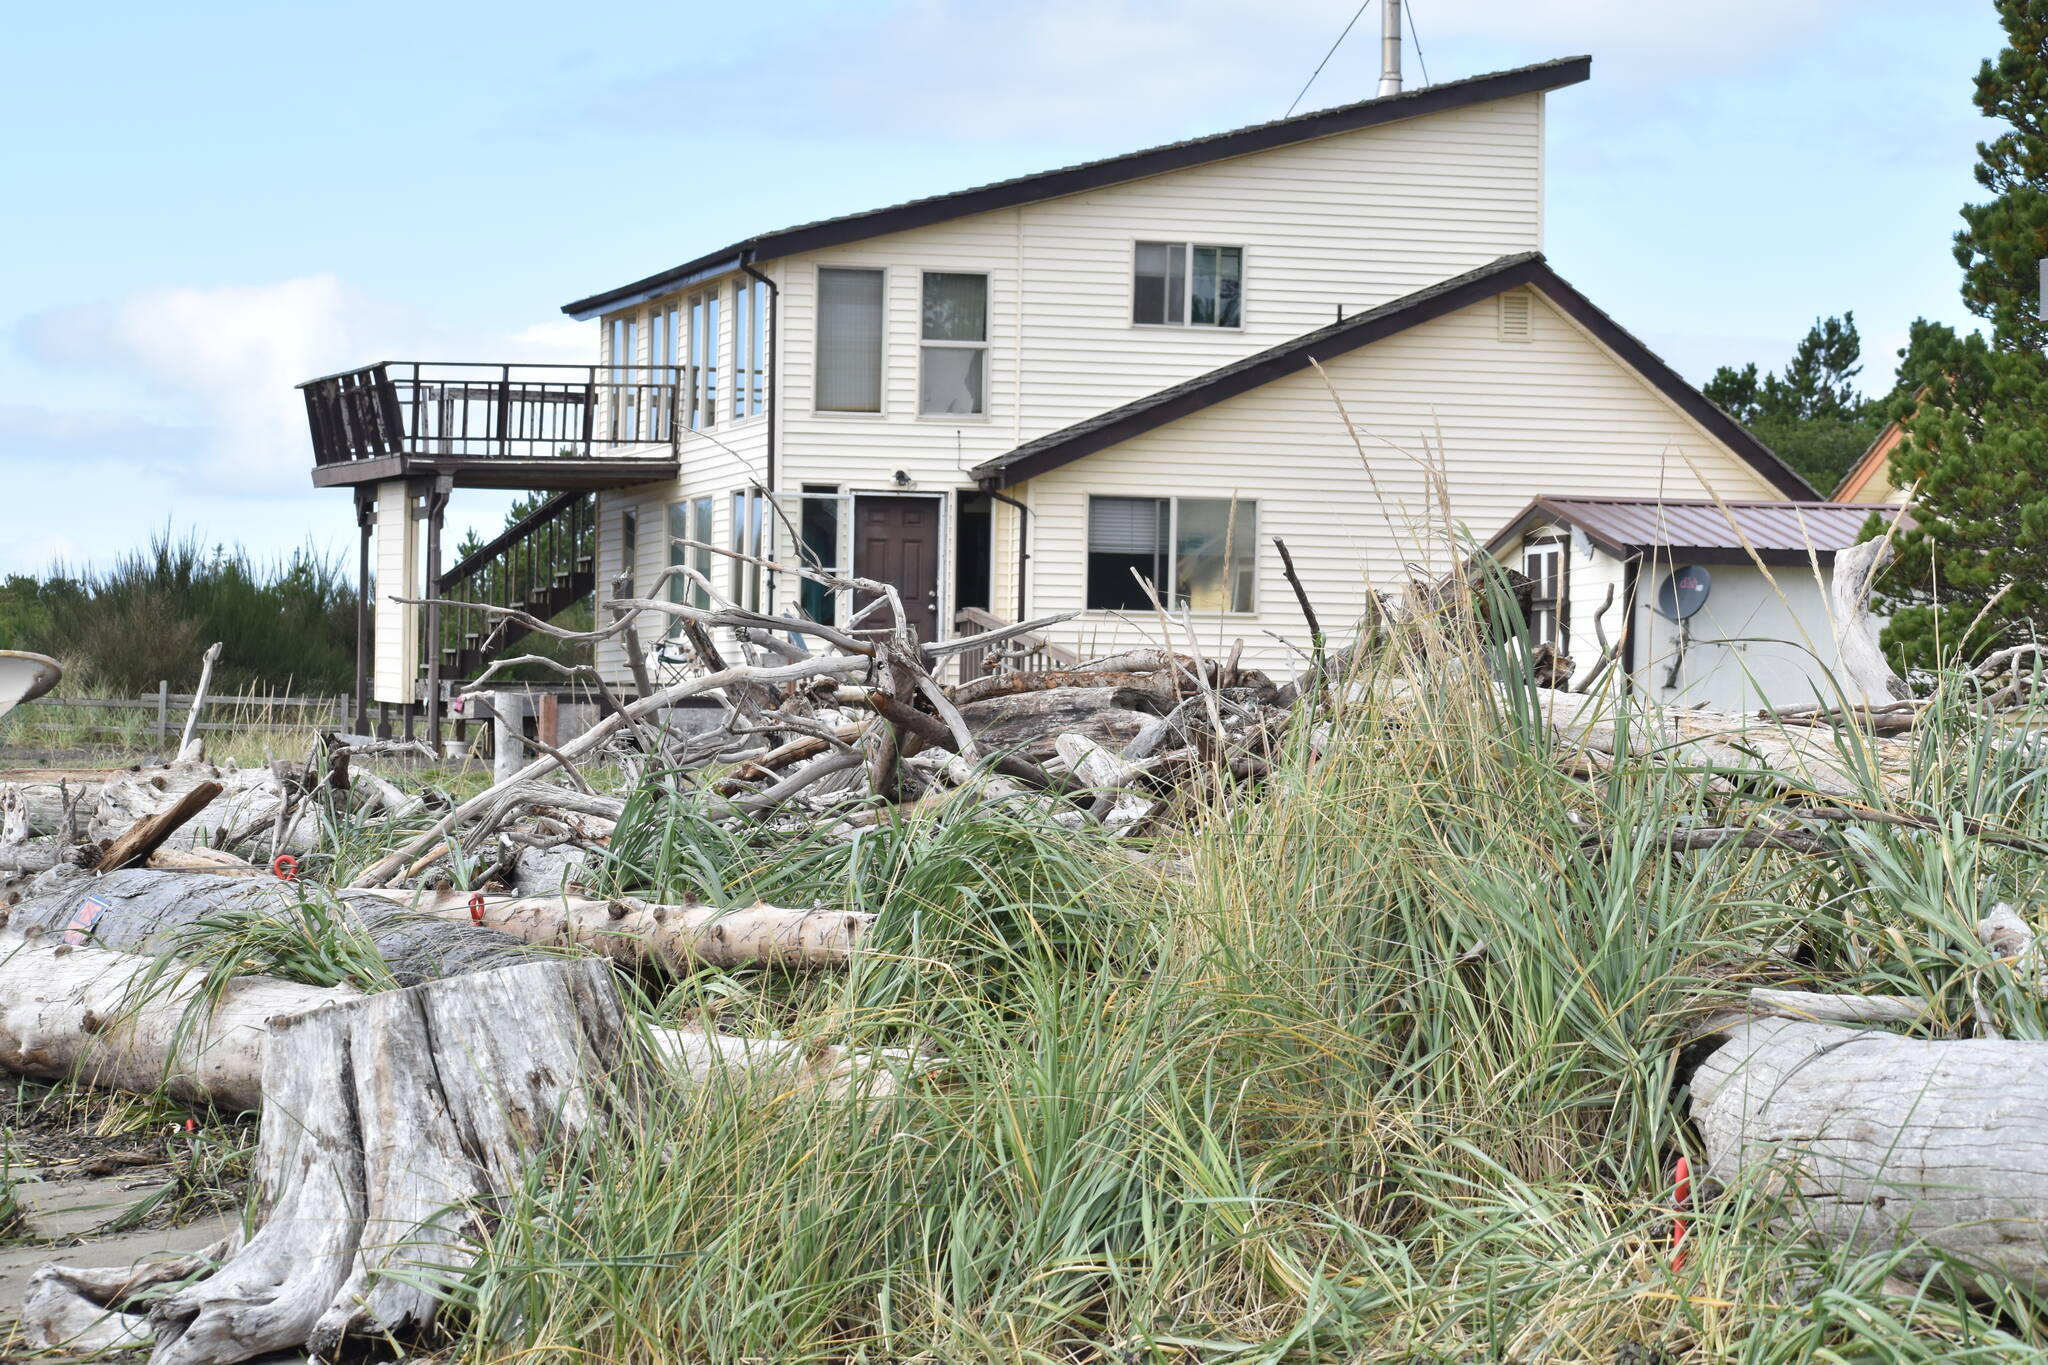 Clayton Franke / The Daily World
Residents on Marine View Drive in Ocean have stacked up driftwood logs to brace their houses from storm swells and king tides forecast for this winter.